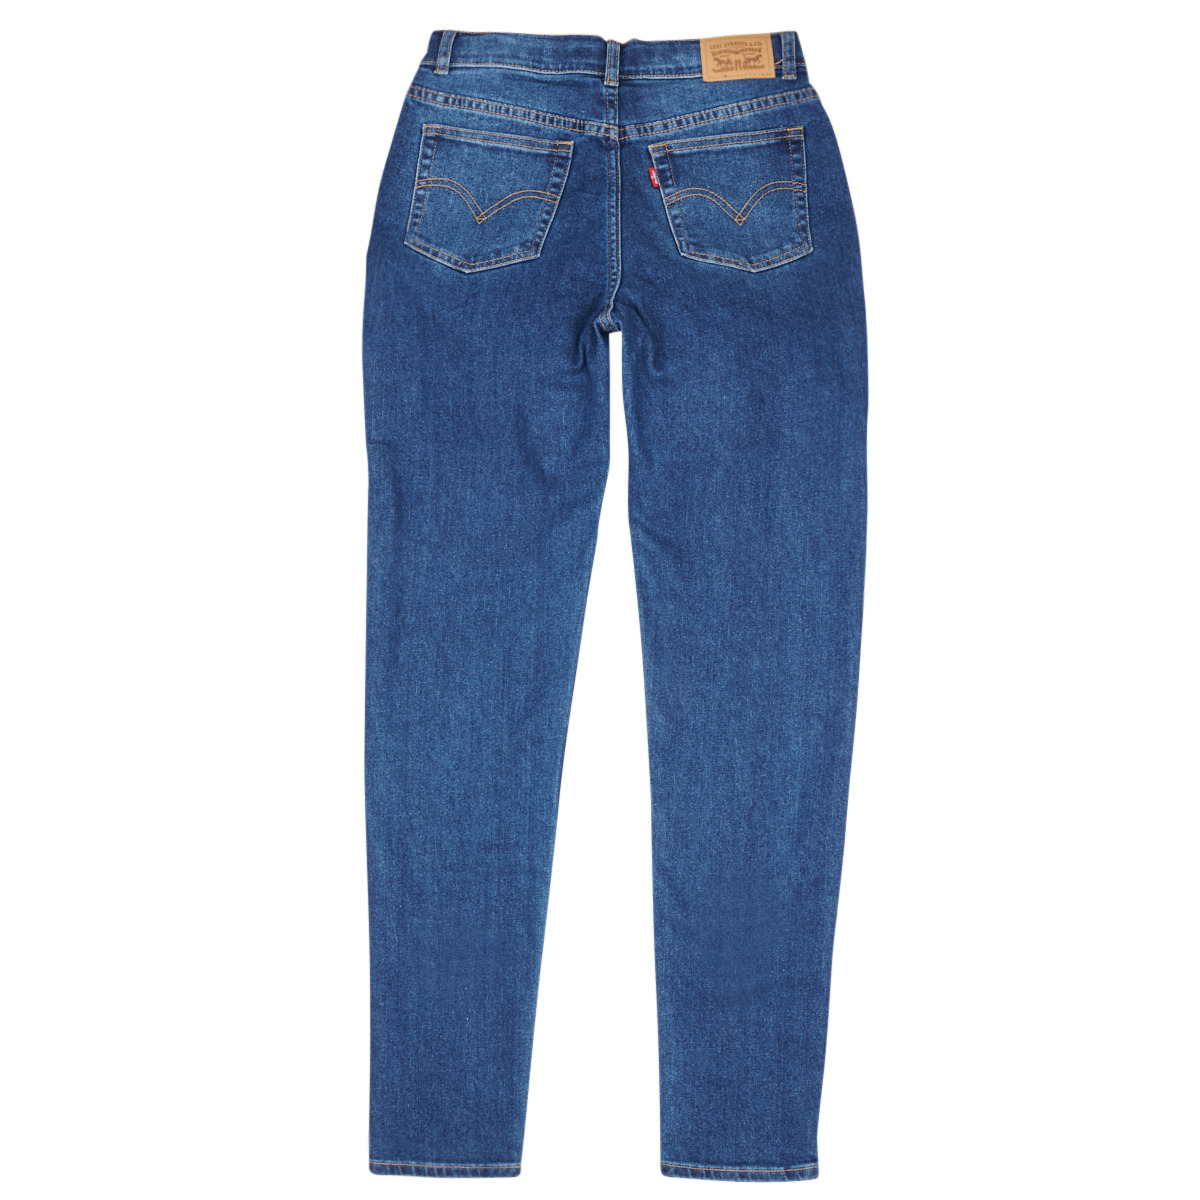 Levi´s ALL THE FEEL MINI MOM JEANS IVc6Jd2Y